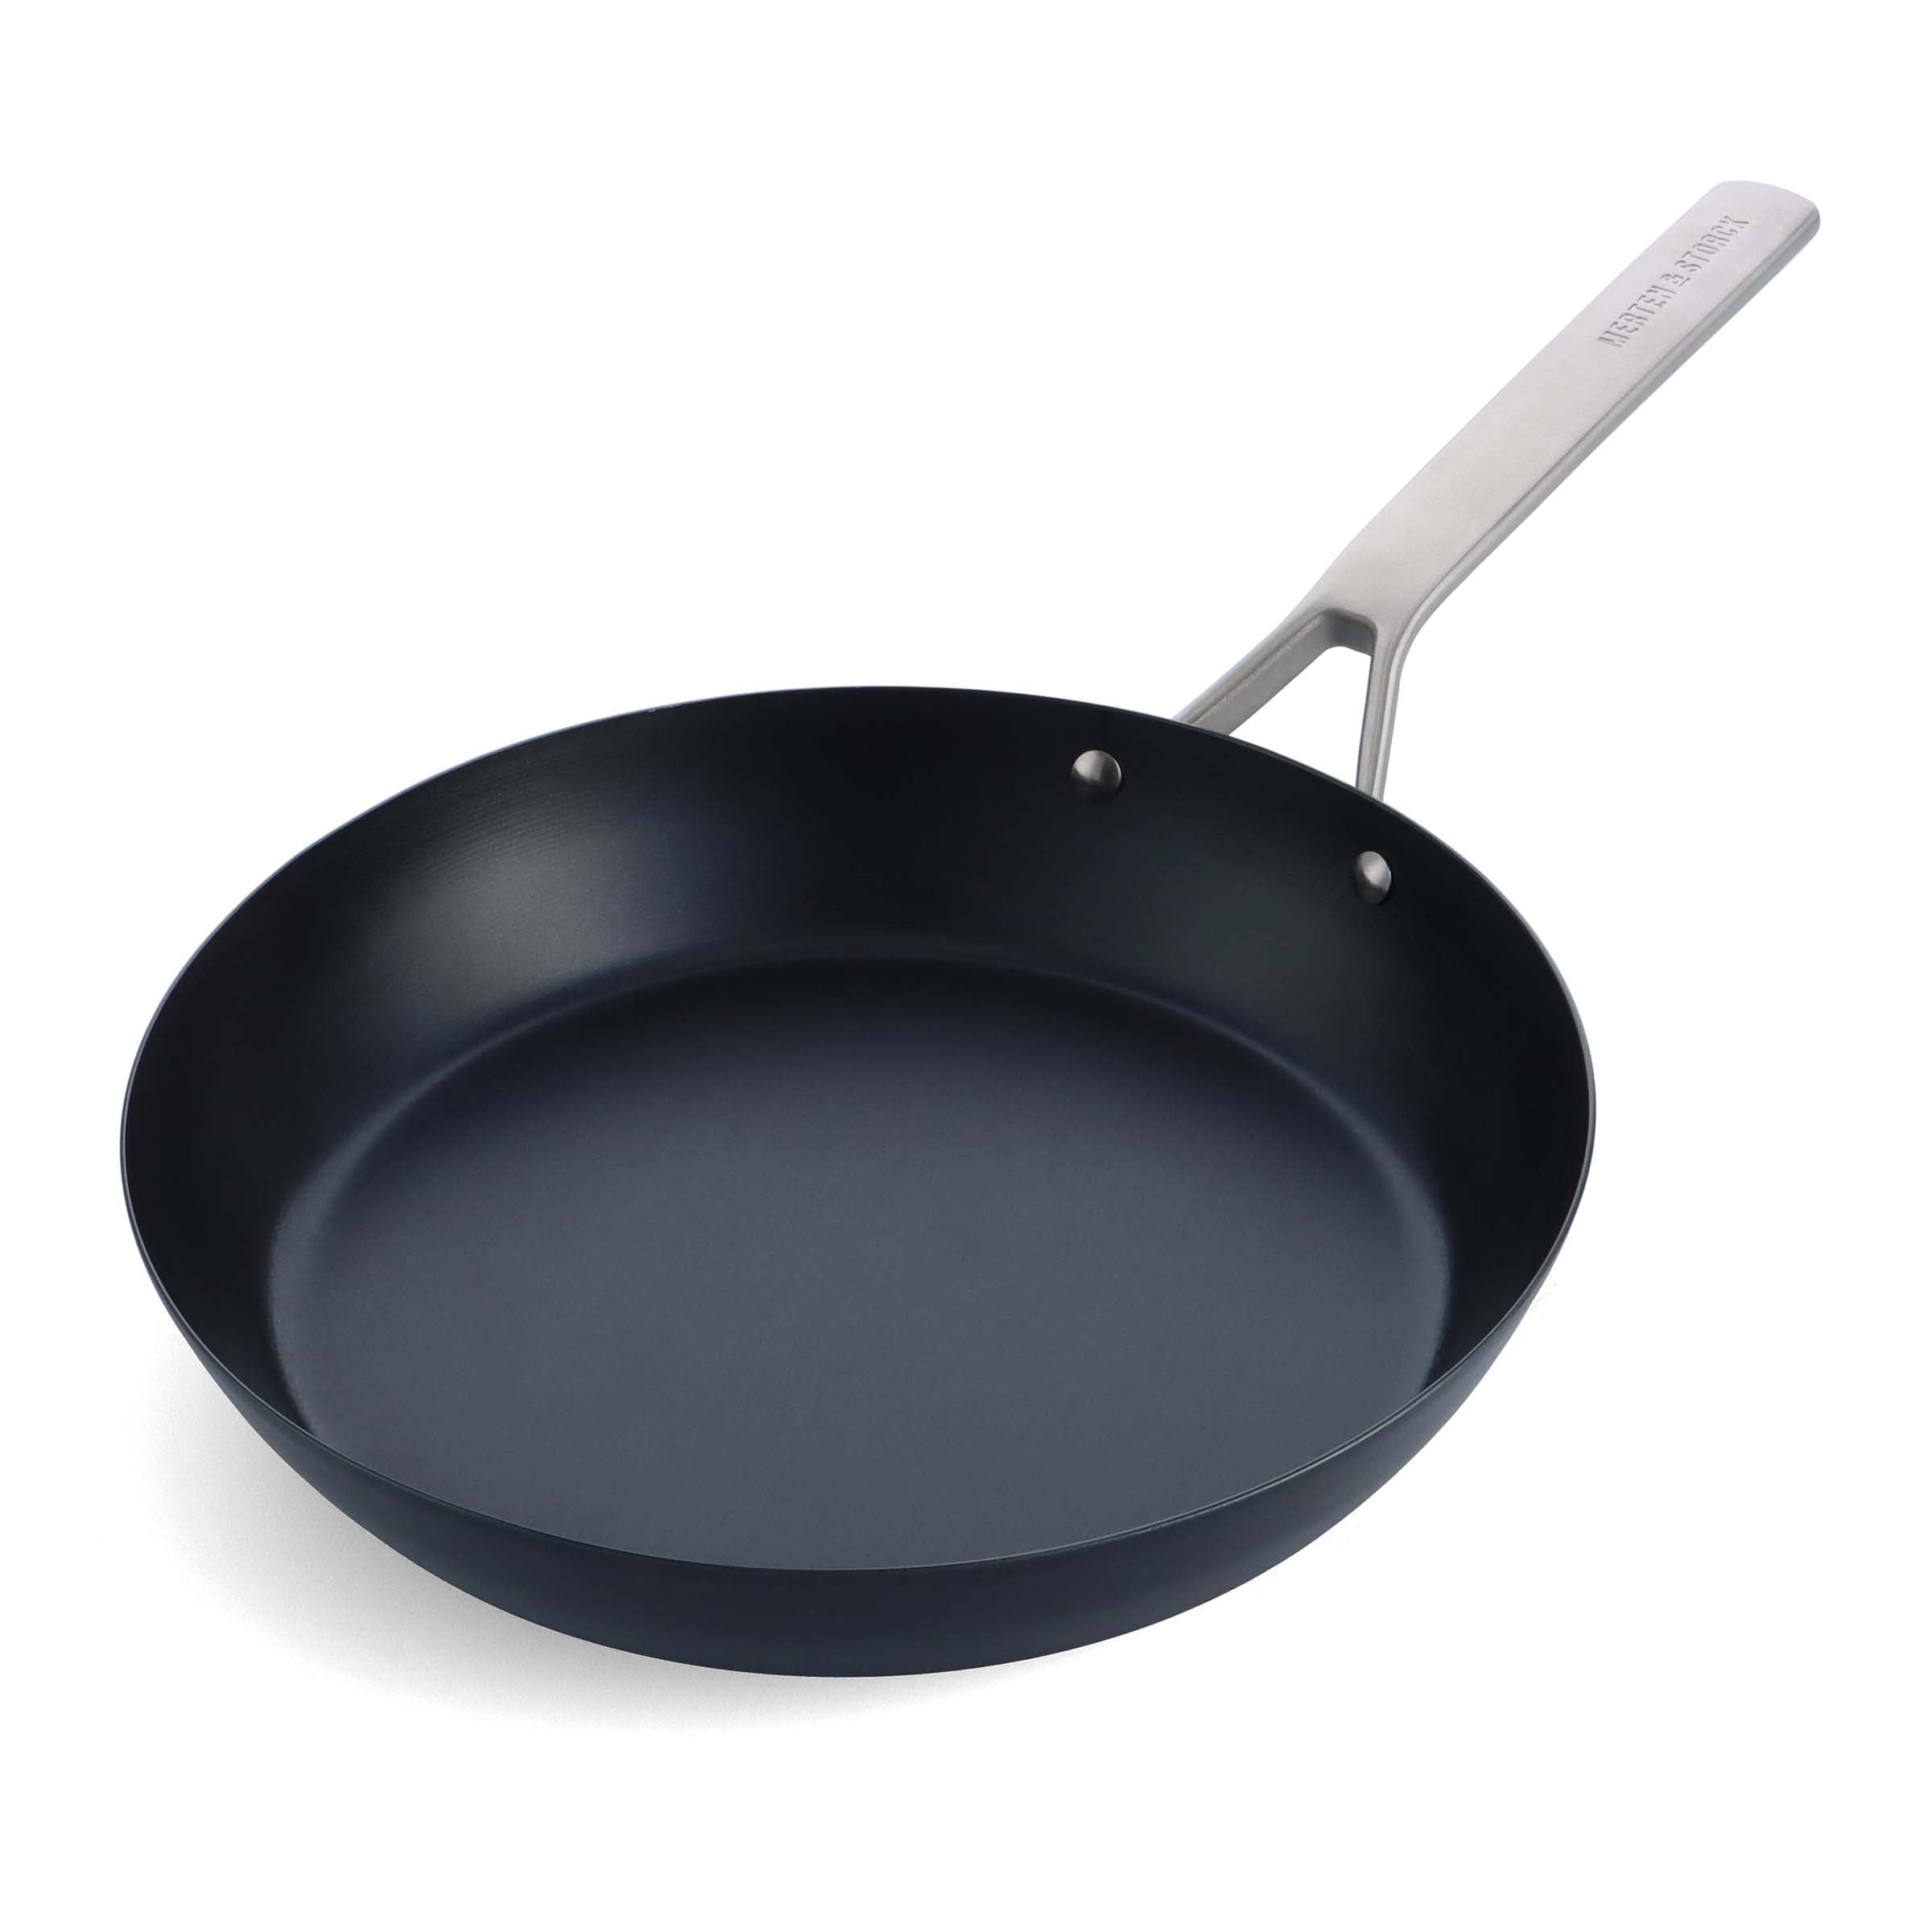 Skillet, Frying Pan, Sauté Pan: What's the difference? – Sardel